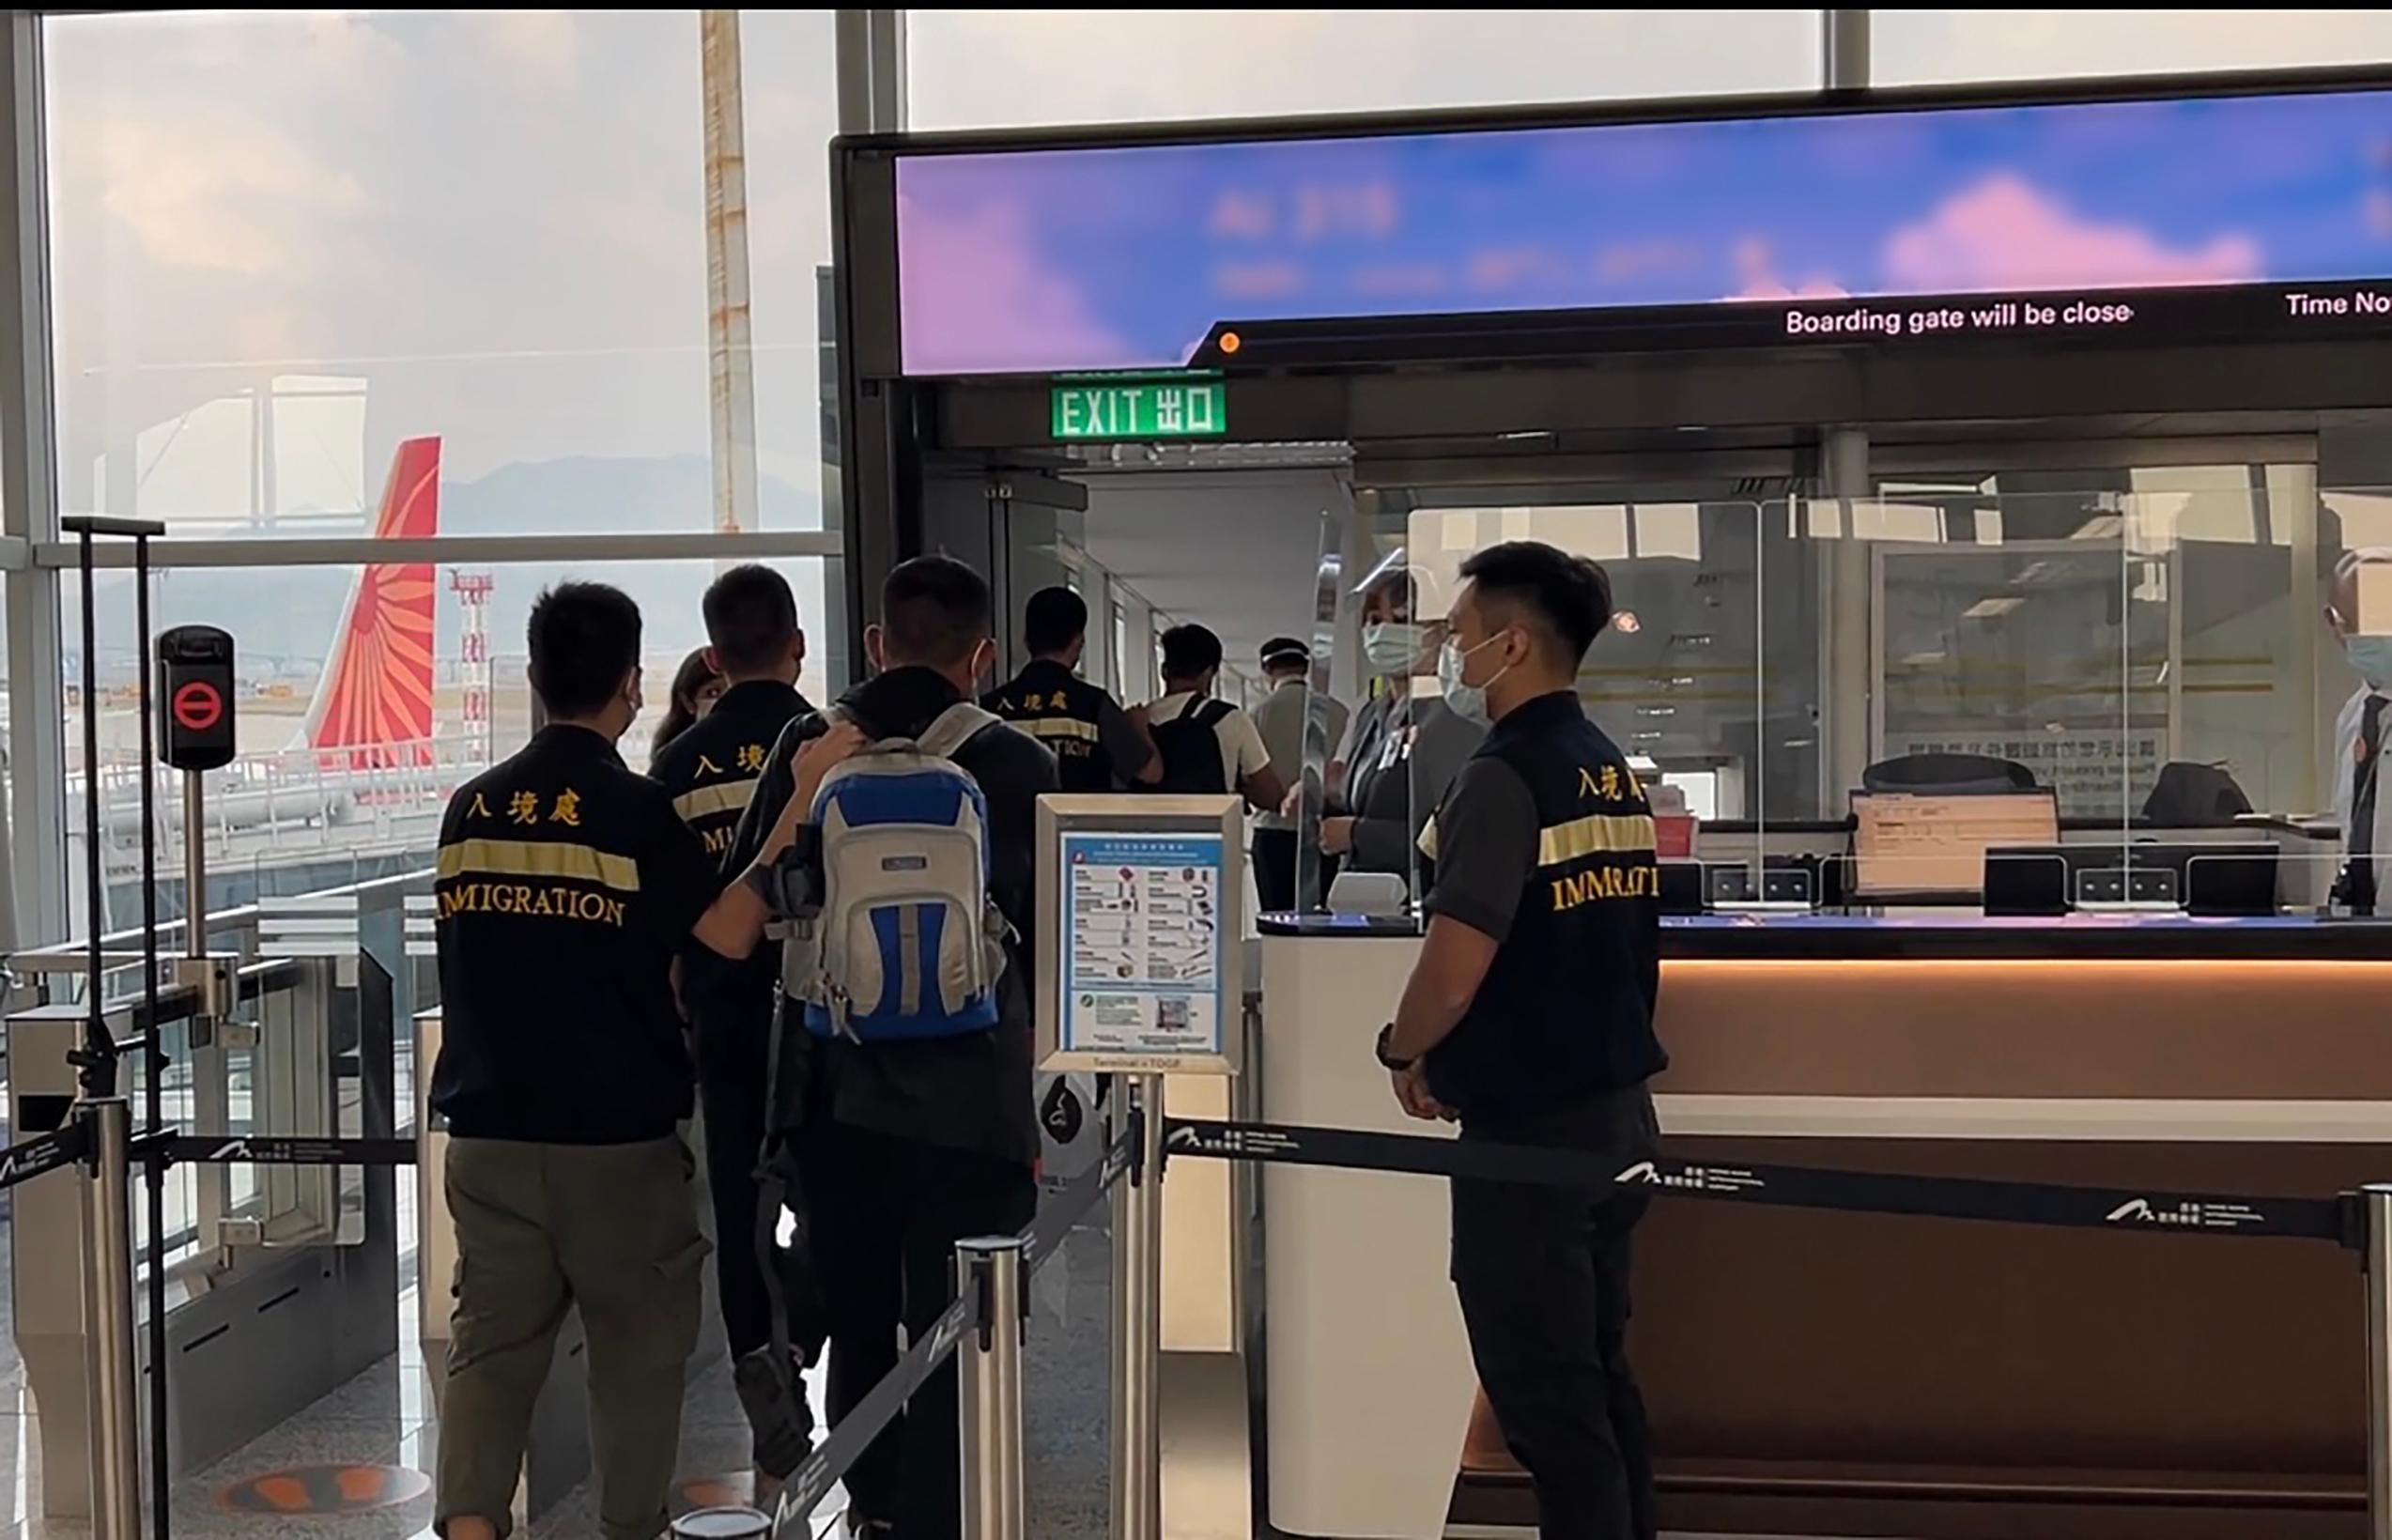 The Immigration Department (ImmD) carried out repatriation operations from September 13 to yesterday (September 20). A total of 45 unsubstantiated non-refoulement claimants were repatriated to their places of origin. Photo shows removees being escorted by ImmD officers to depart Hong Kong.